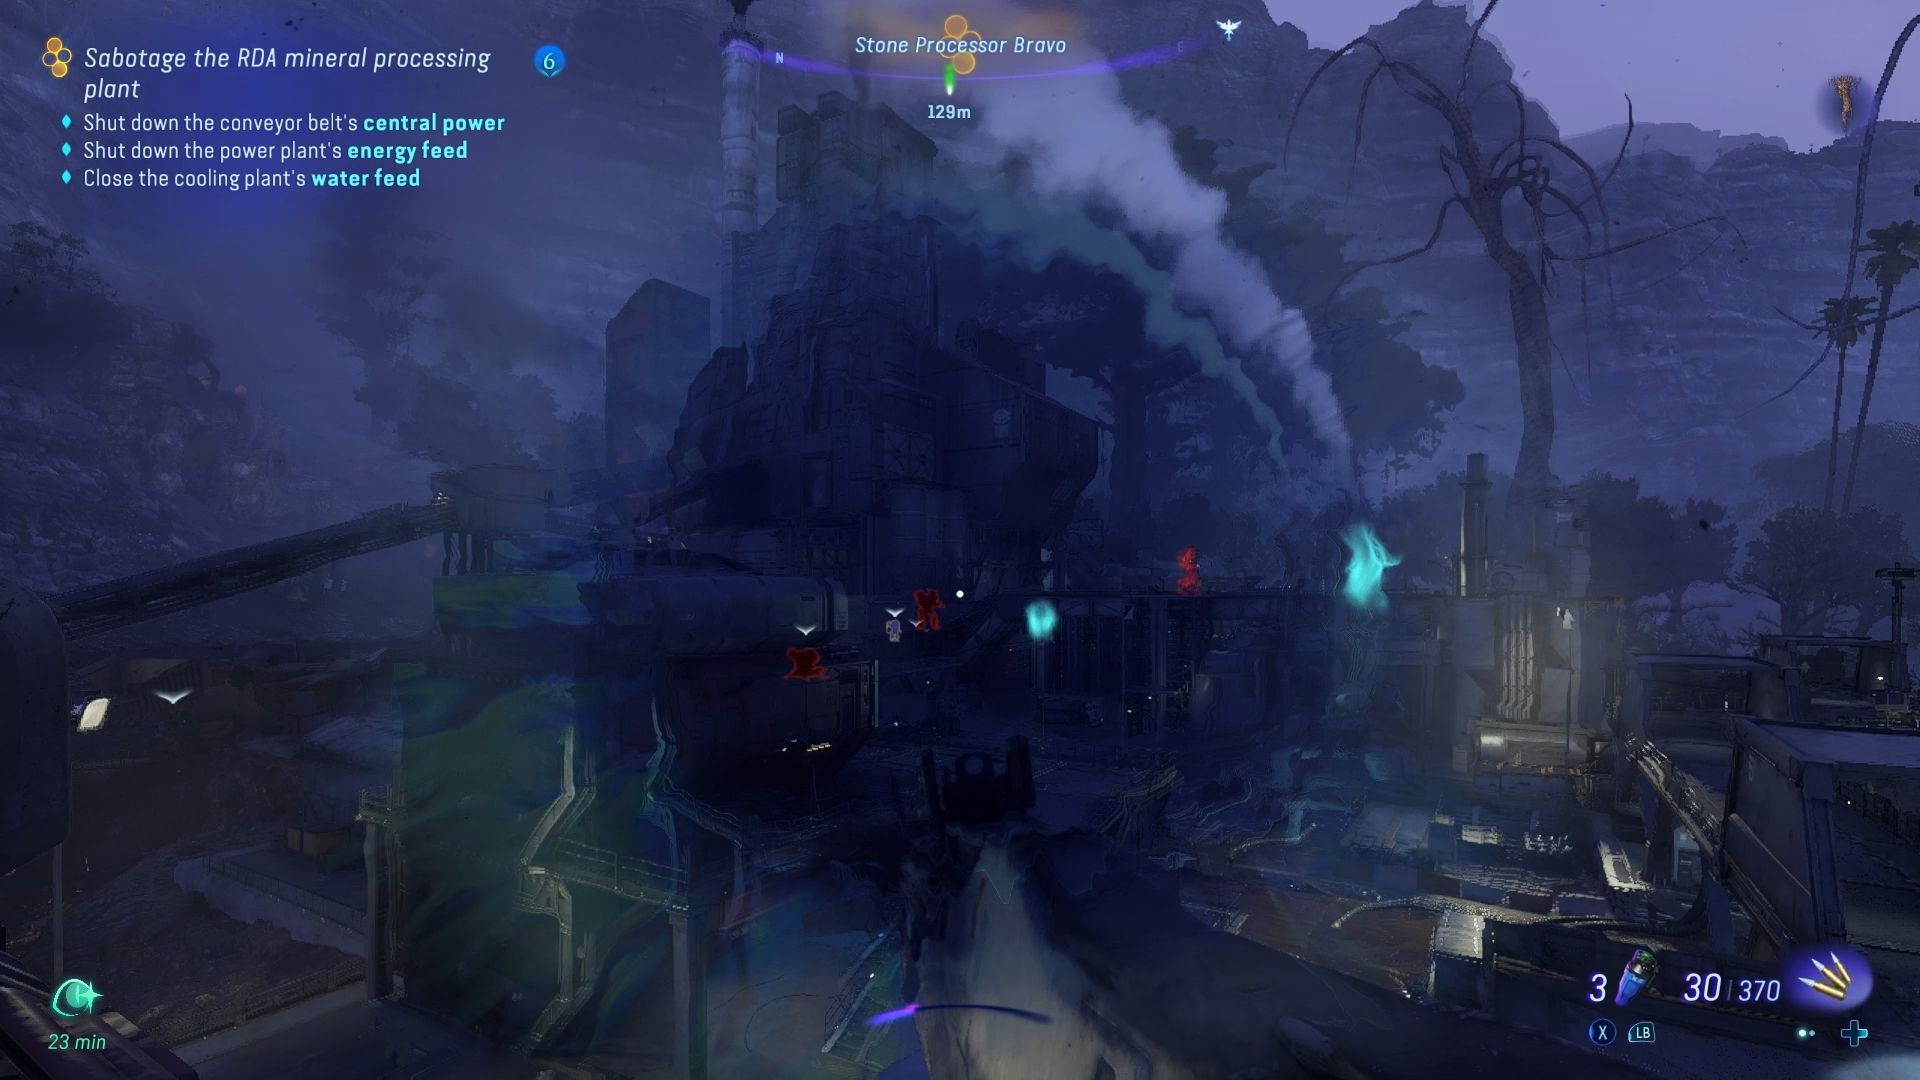 Player using his na'vi senses to highlight enemies in an RDA base Avatar Frontiers of Pandora